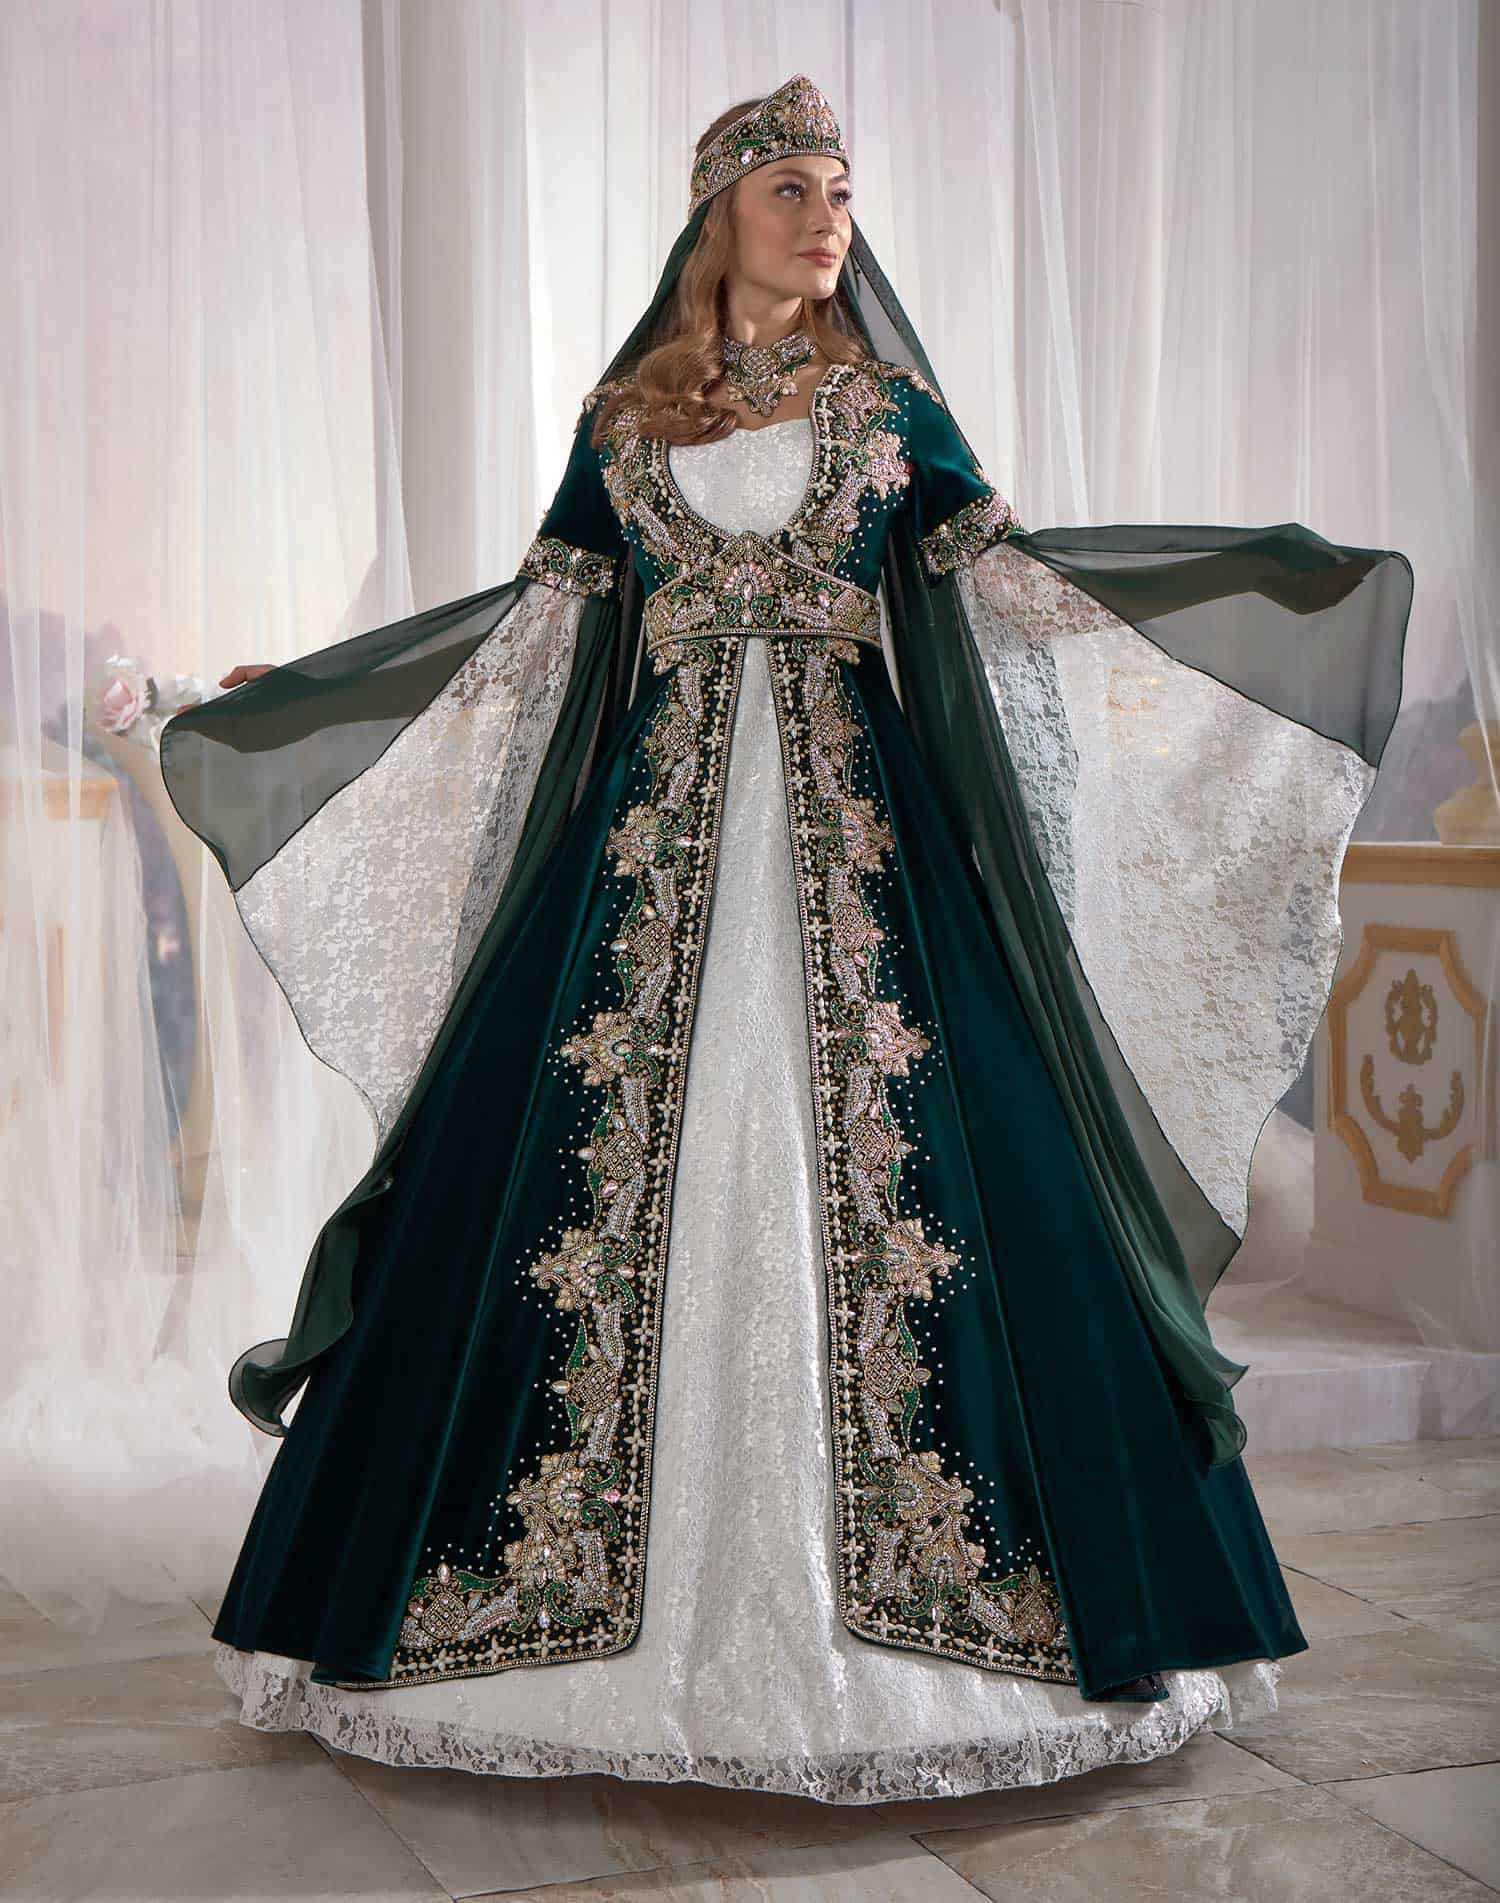 Ottoman caftan dress turkis clothing sultans online shopping108d-2305